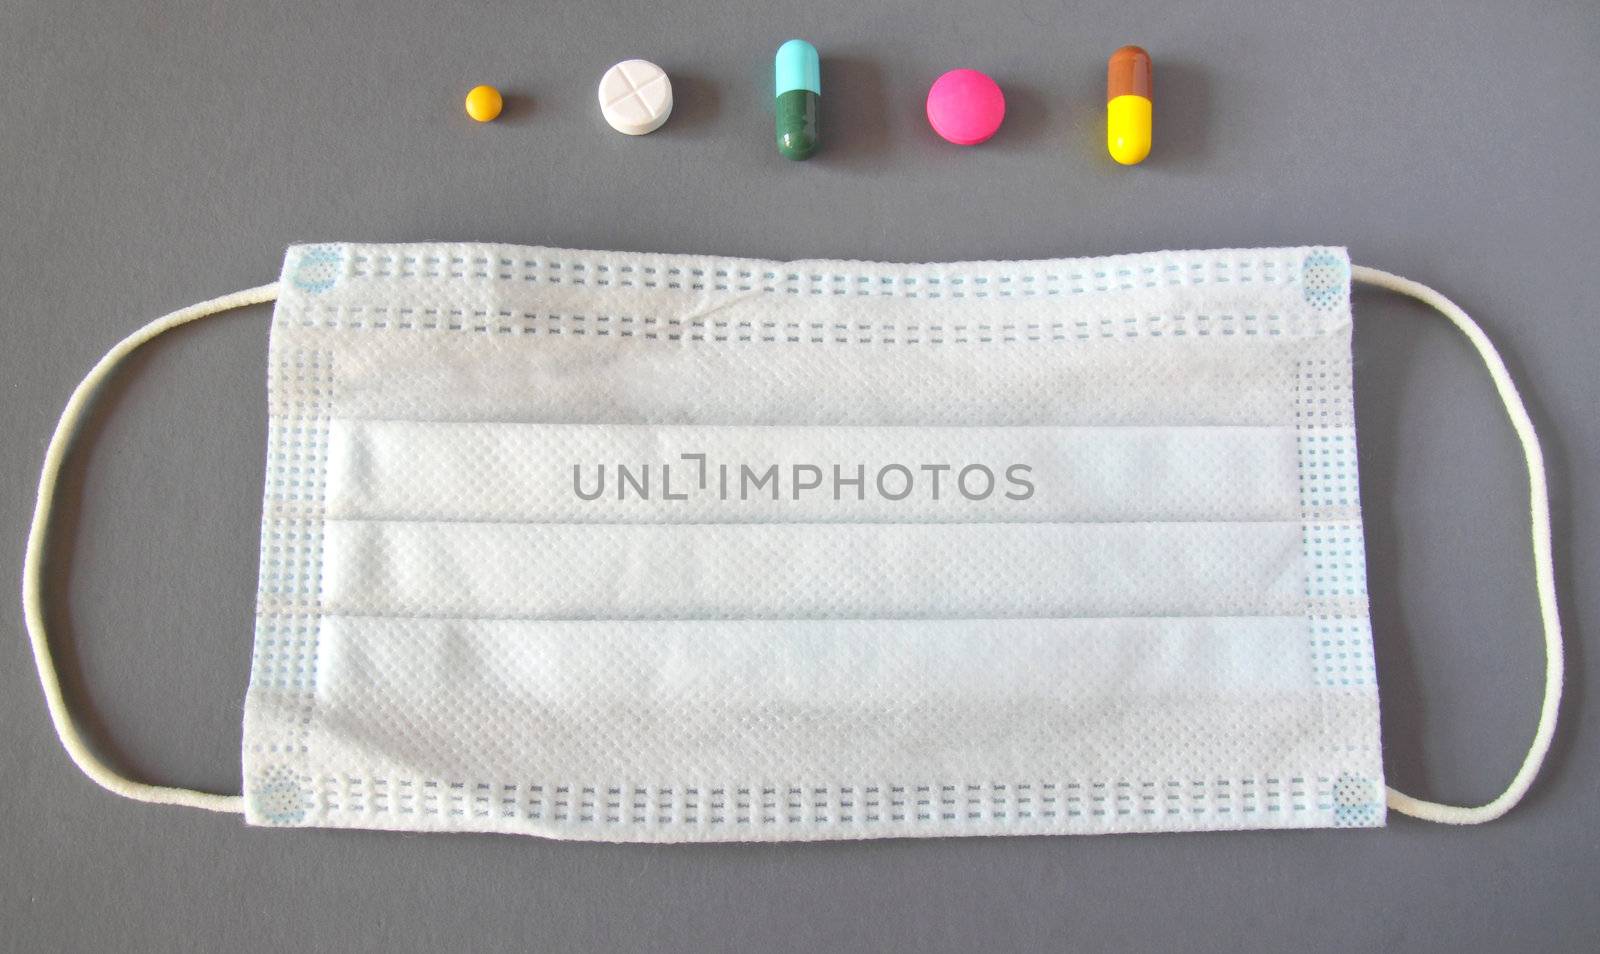 Set of various medical pills and mask on grey background